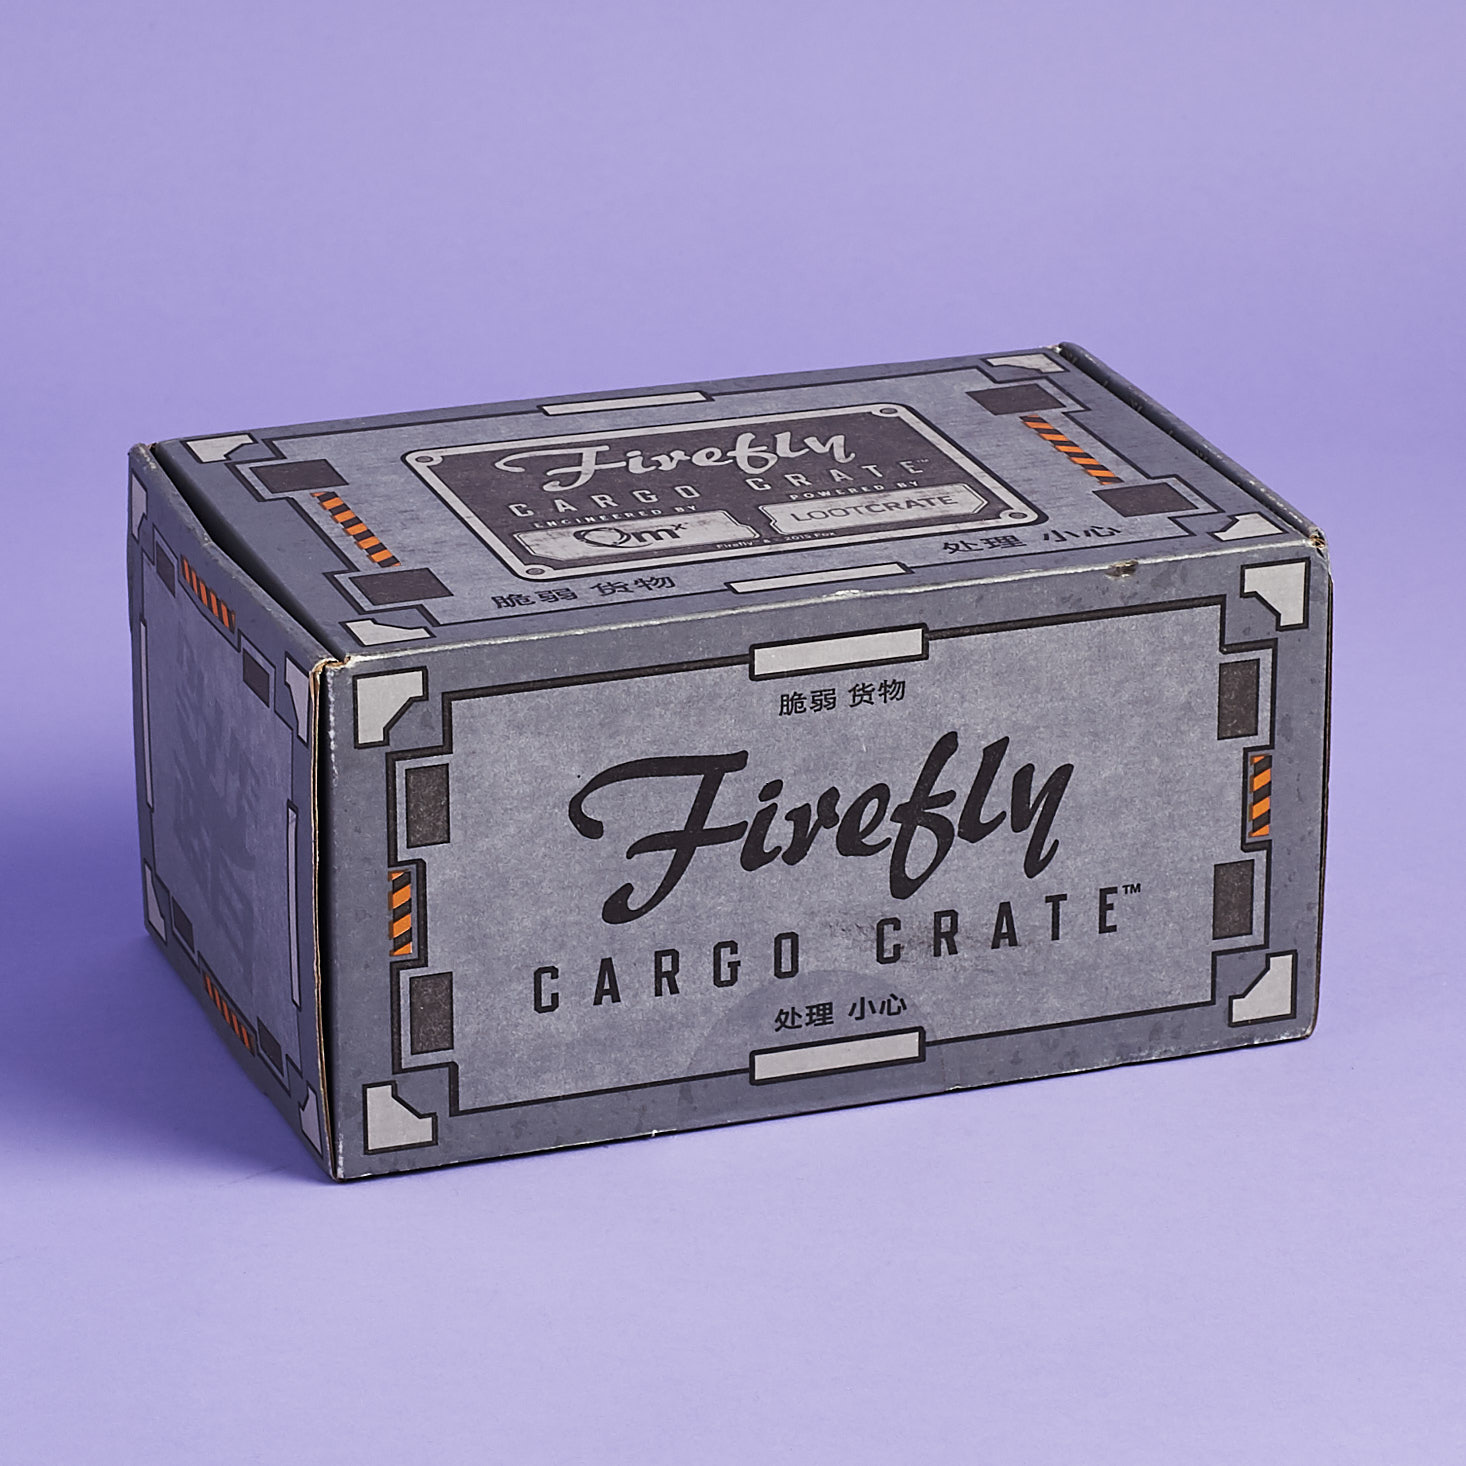 Firefly Cargo Crate by Loot Crate Subscription Box Review + Coupon – Still Flying